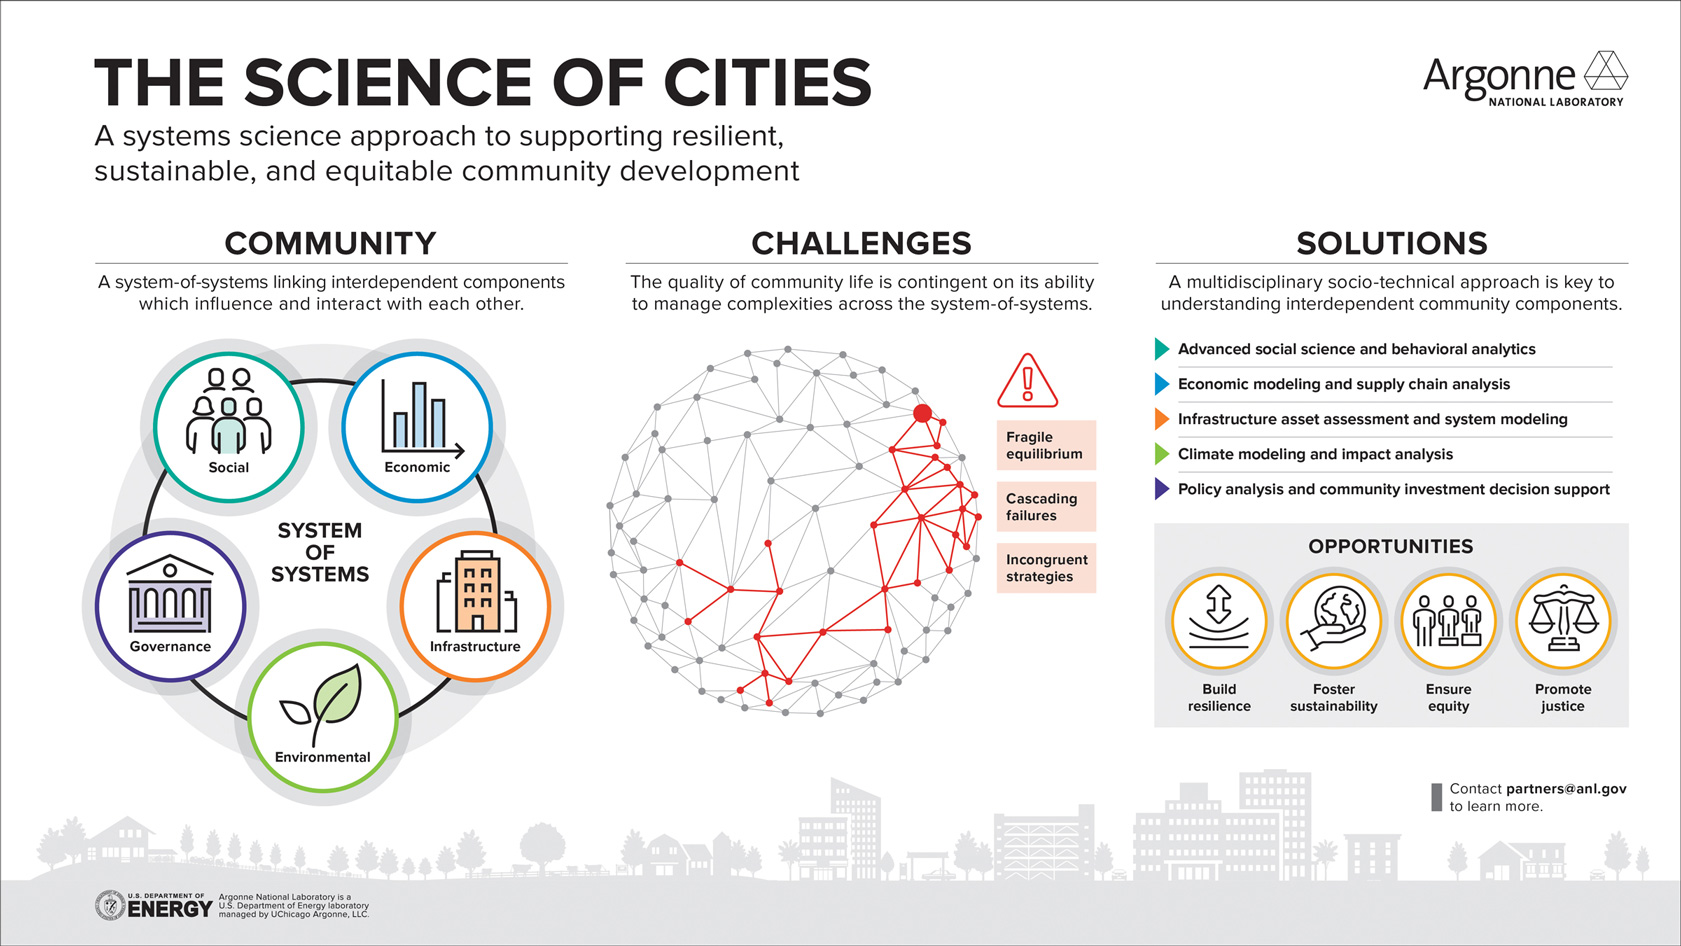 The Science of Cities infographic